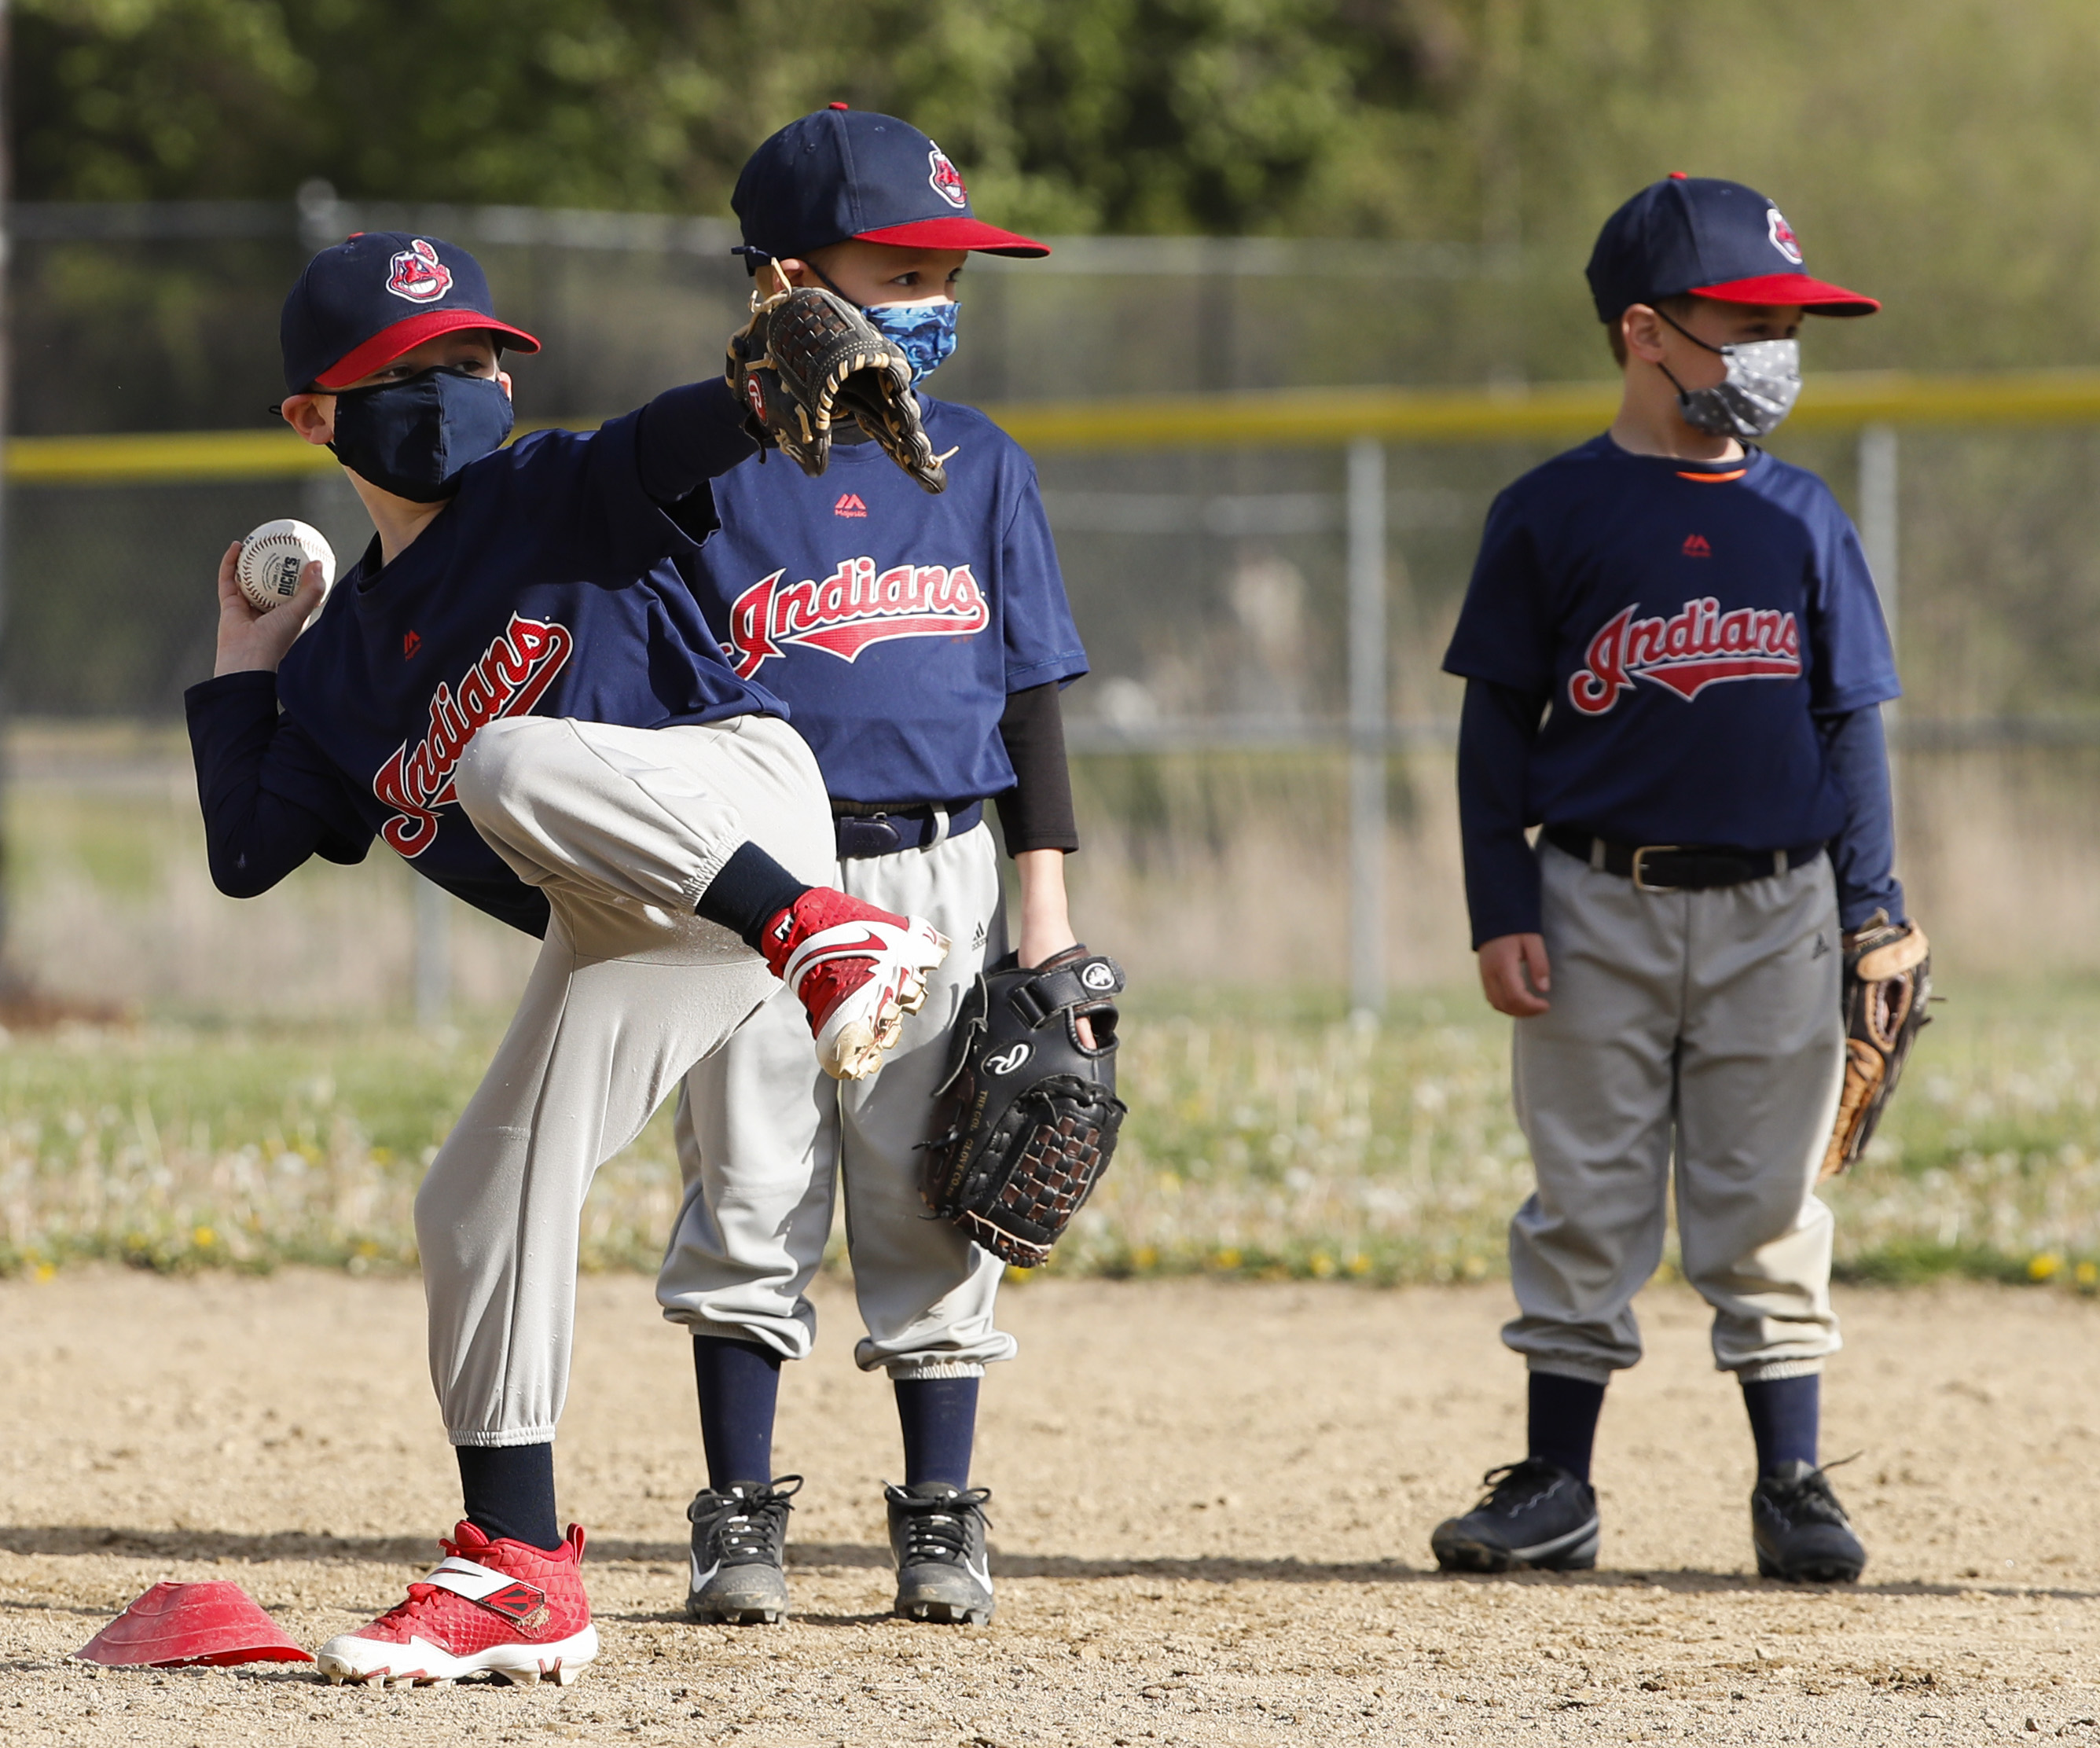 With youth sports back, 'Now you're seeing kids being kids again